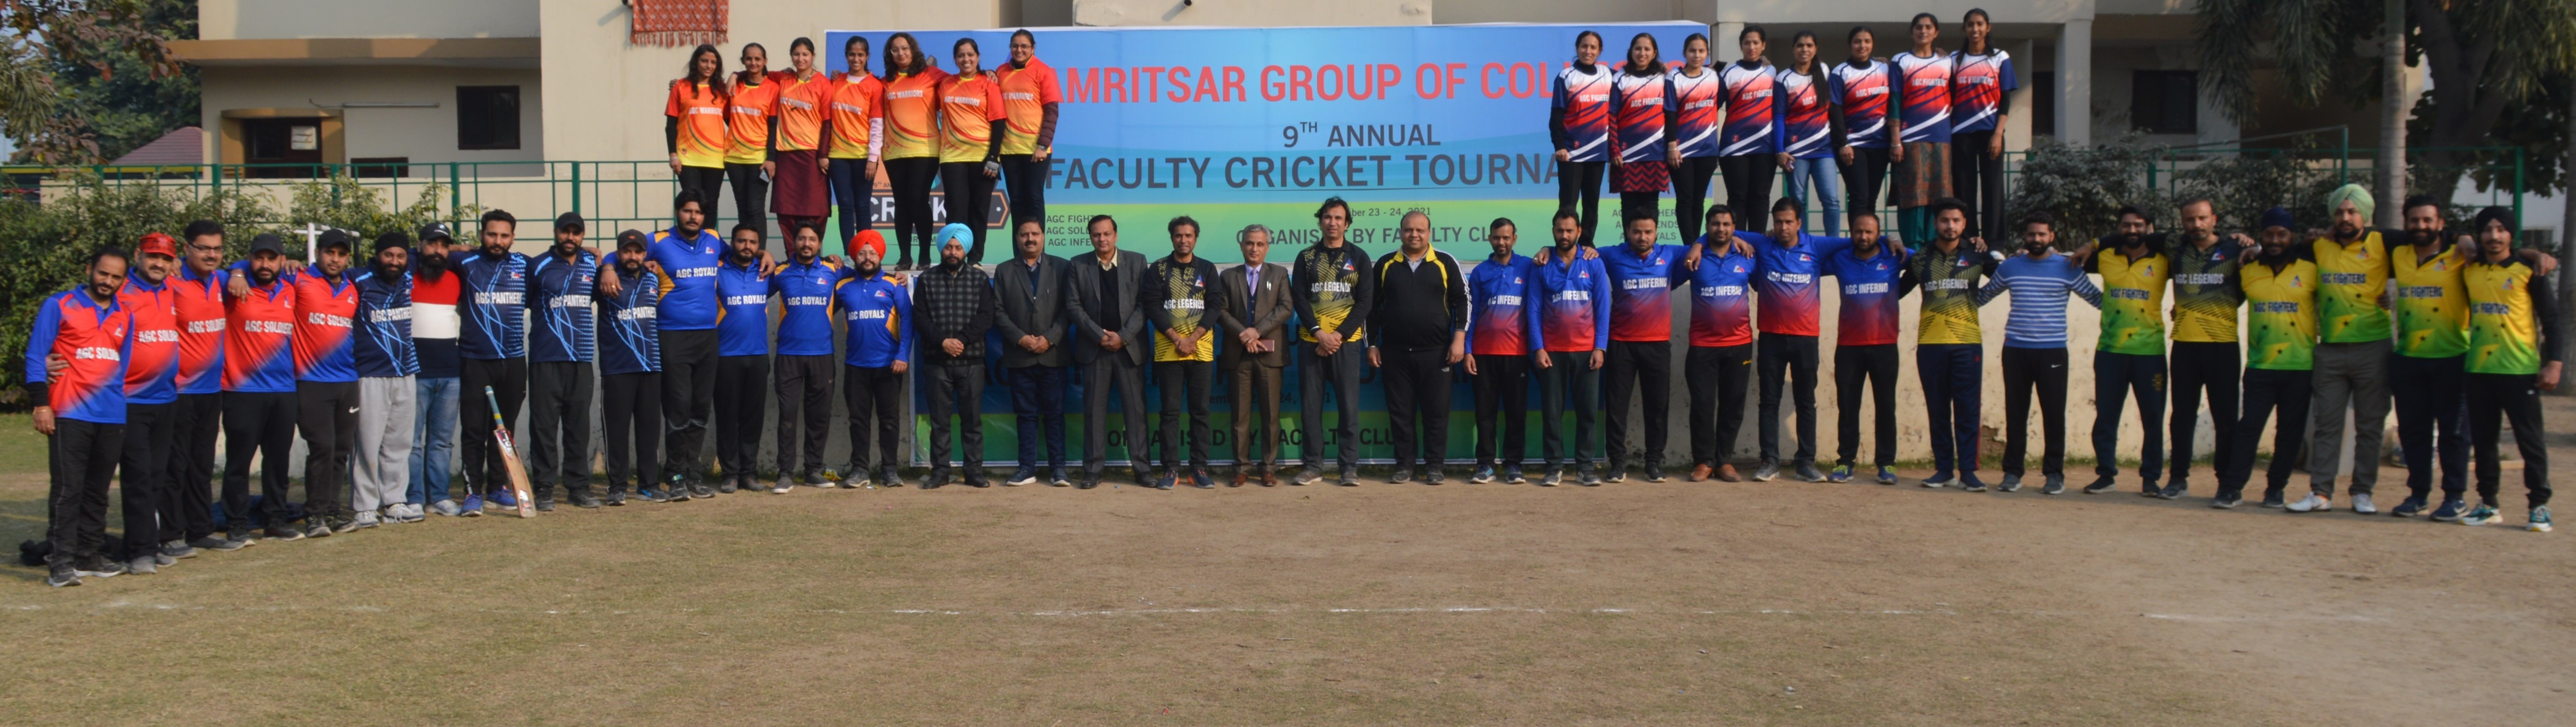 Annual Faculty Cricket Tournament